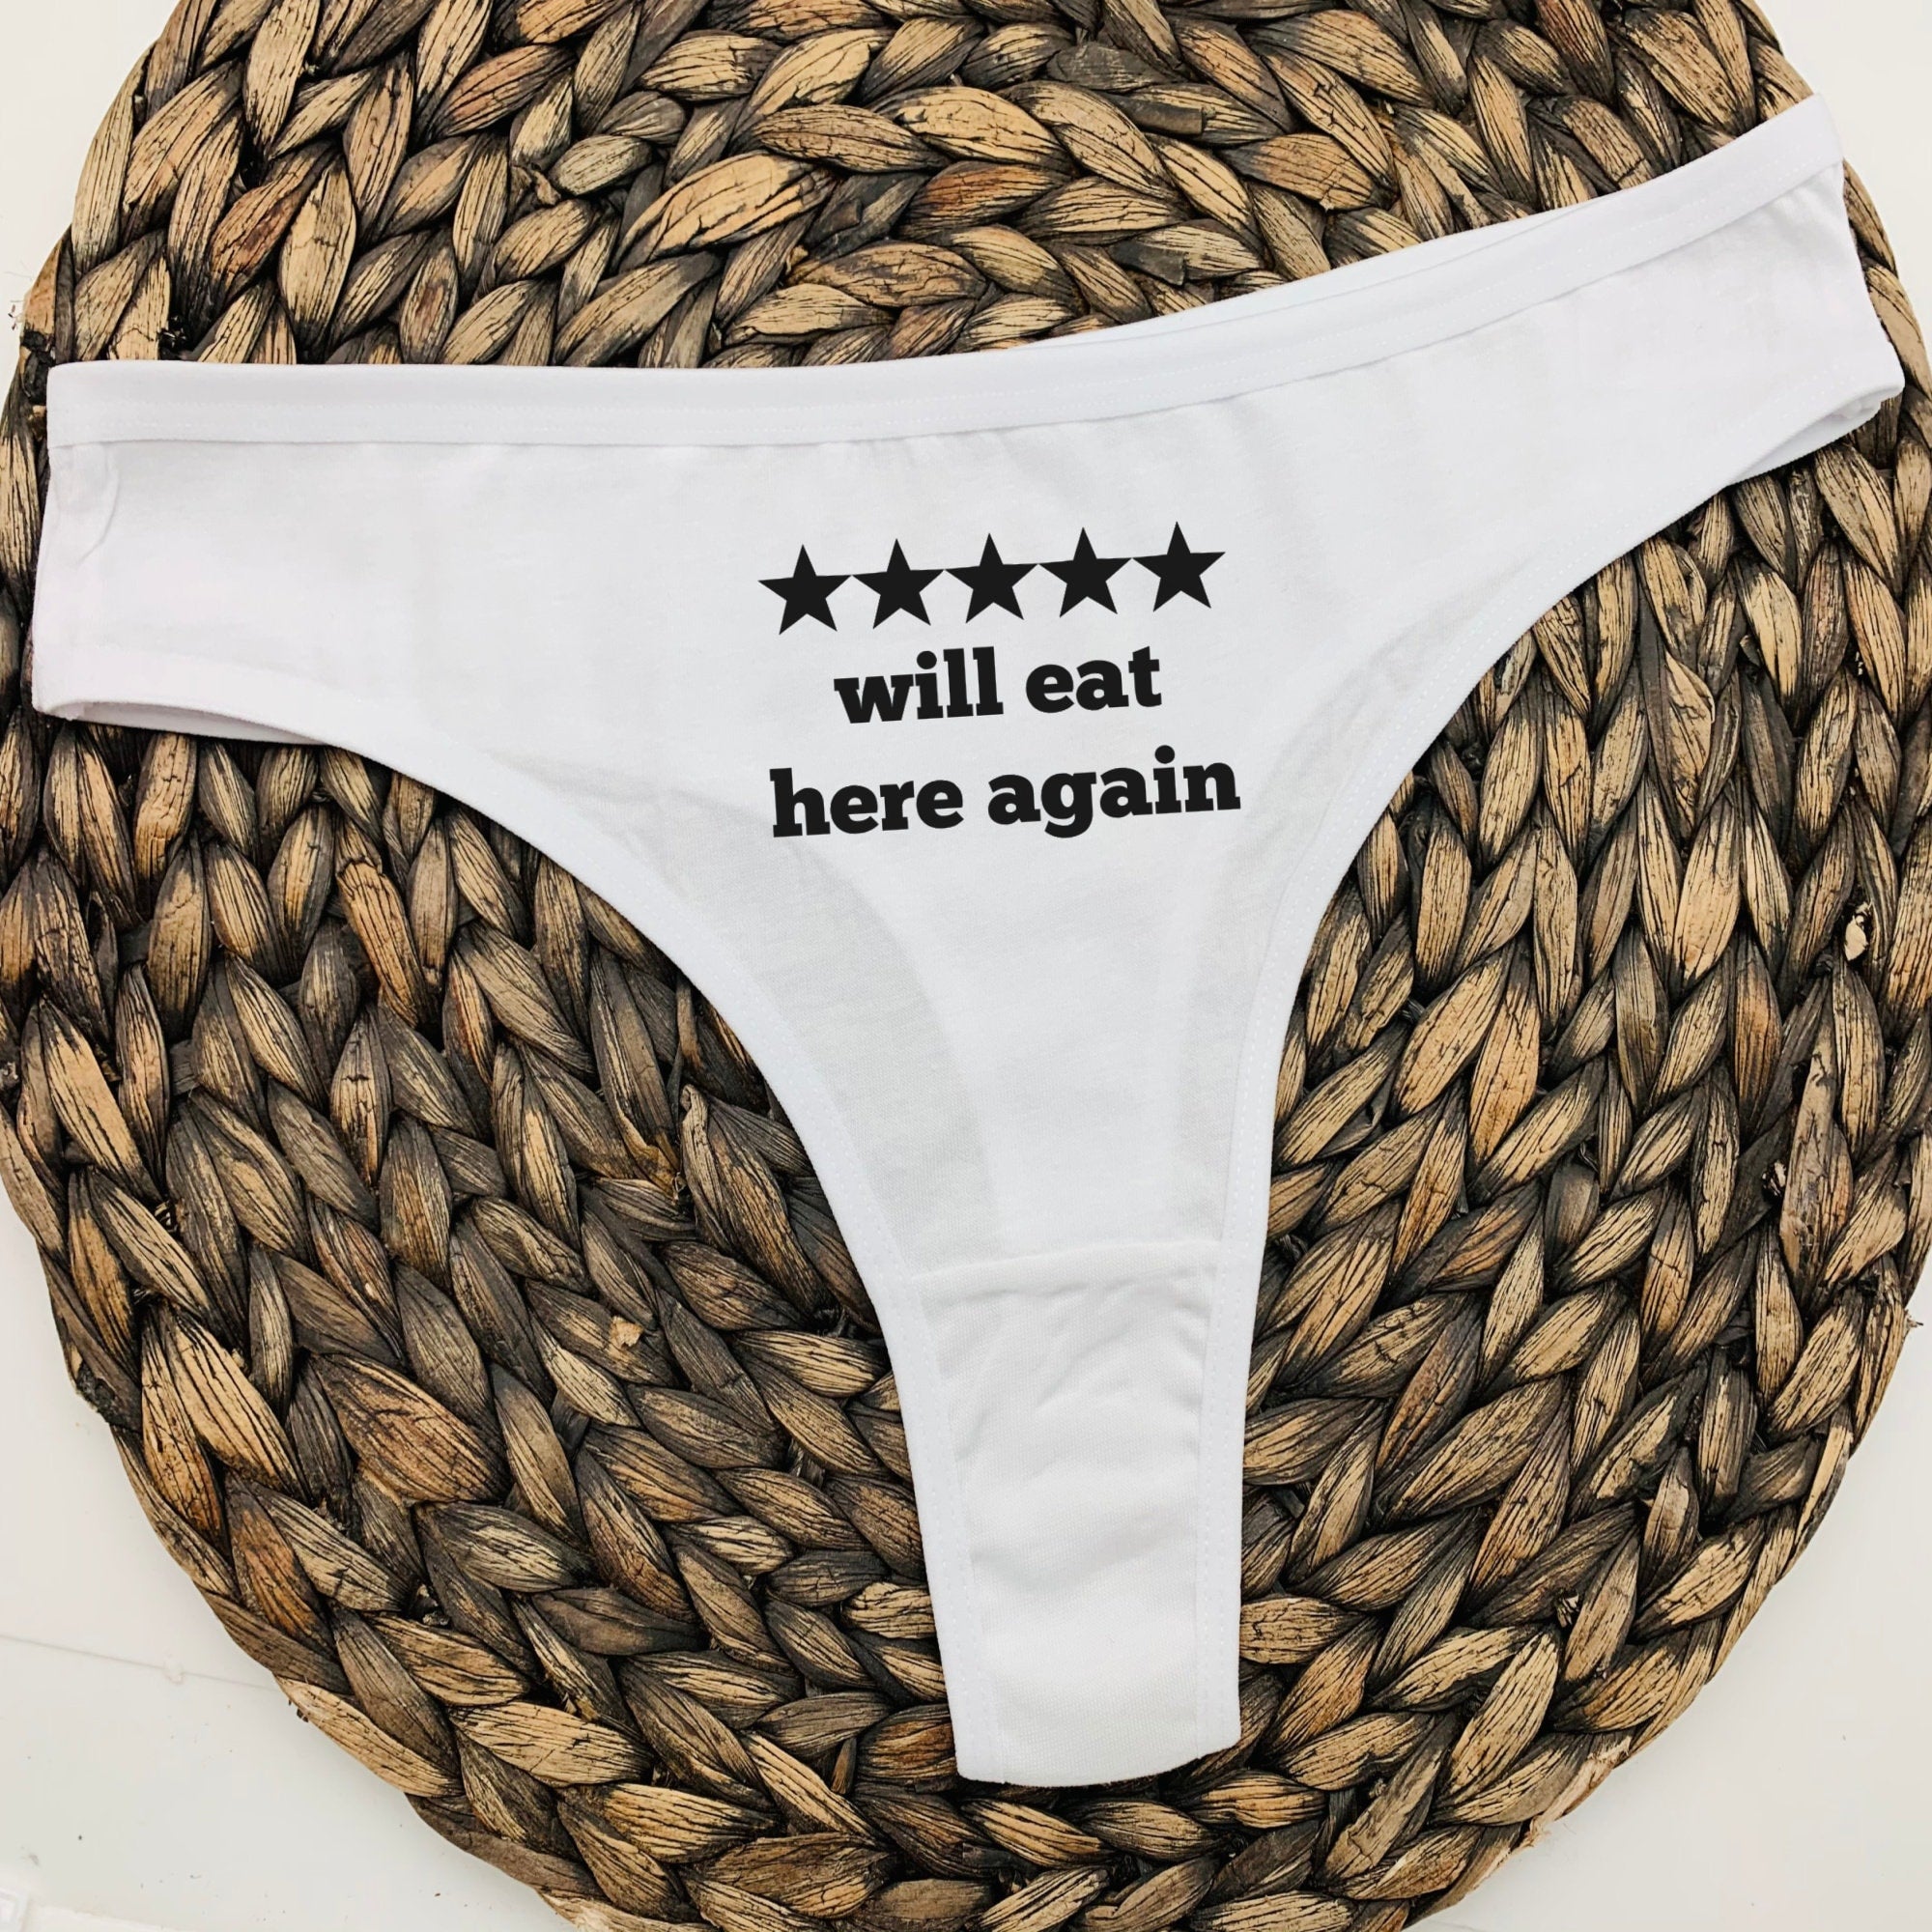 Five Stars - Gourmet Dining Thong: A Cheeky Culinary Statement